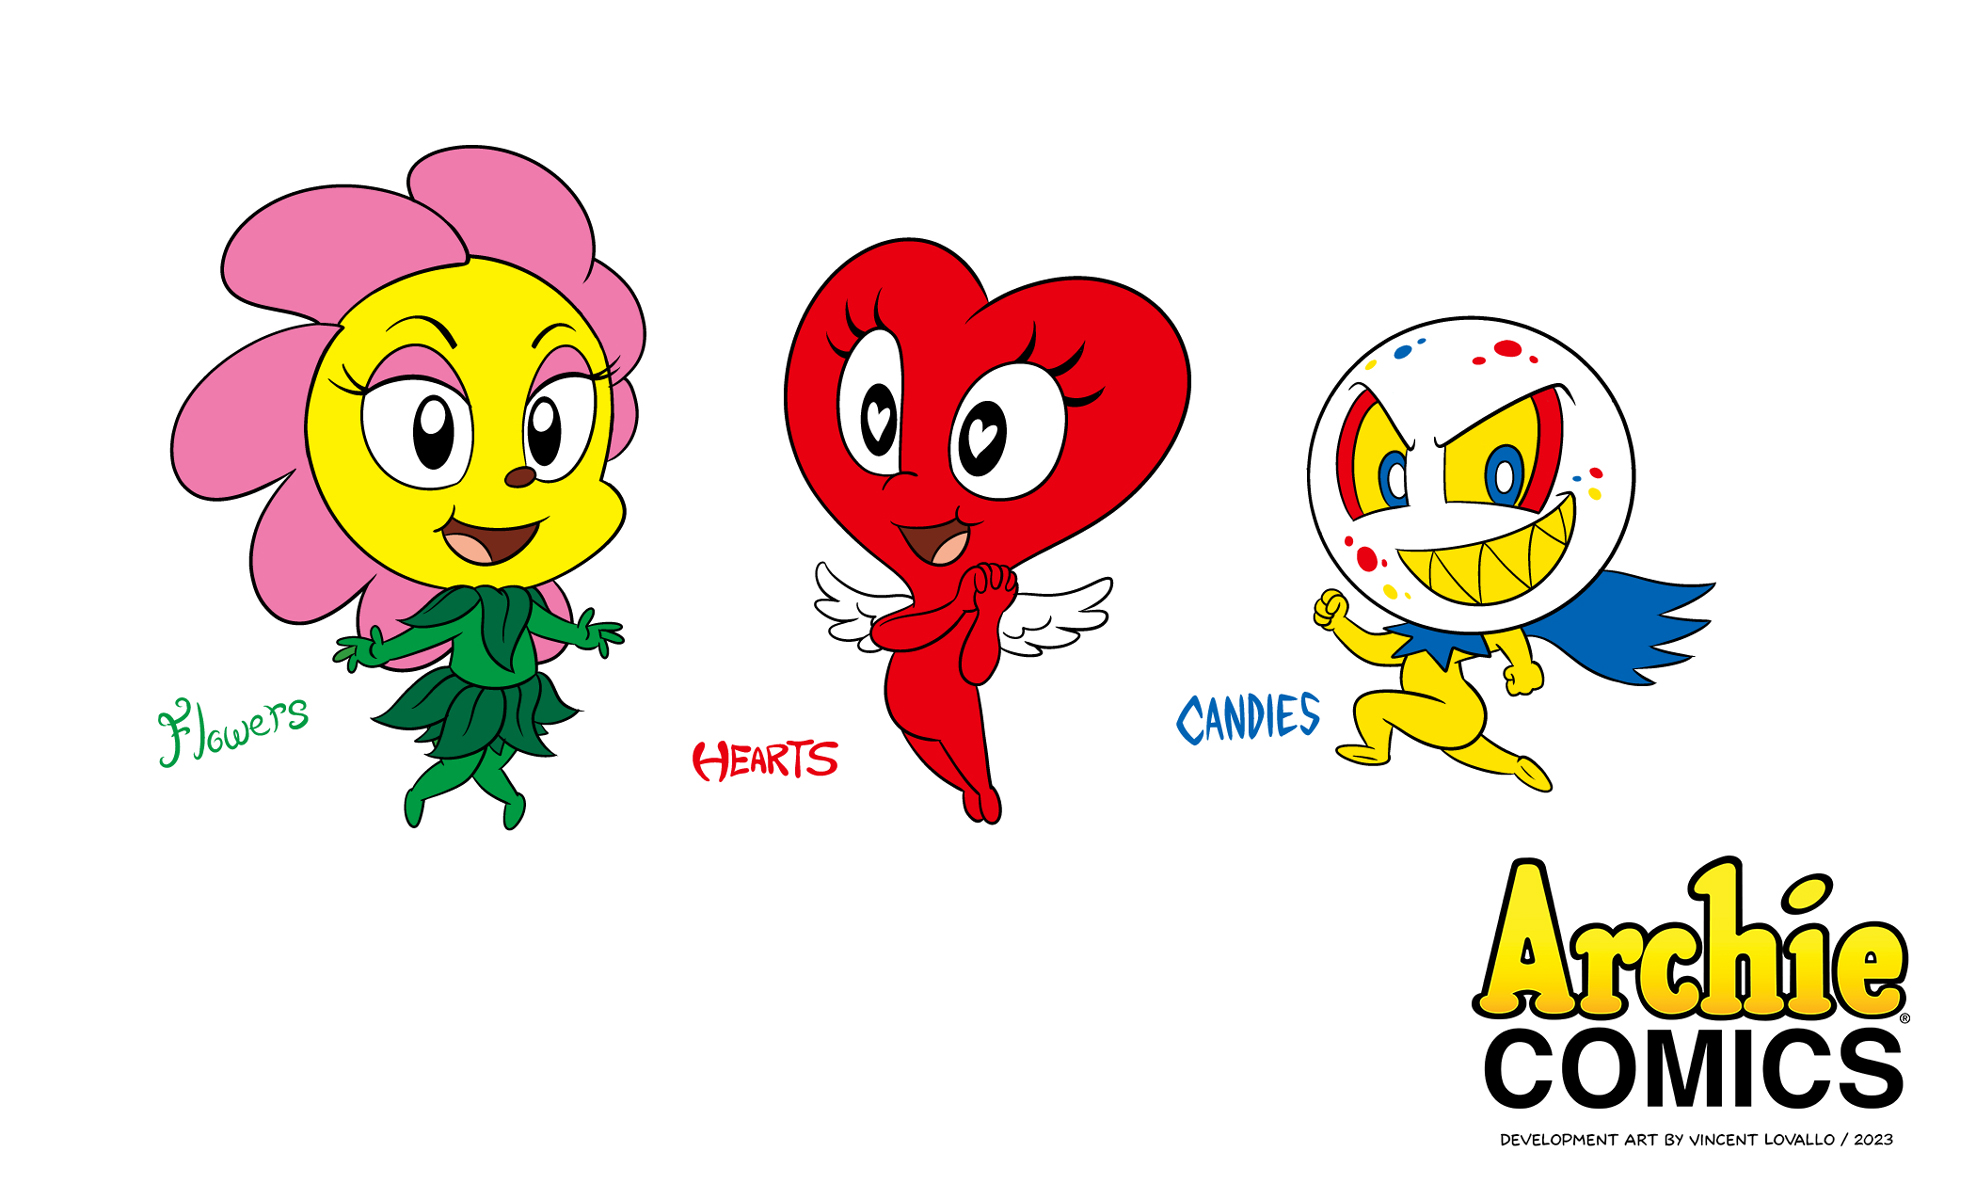 Development art for the characters Flowers, Hearts, and Candies, the Spirits of Valentine's Day.